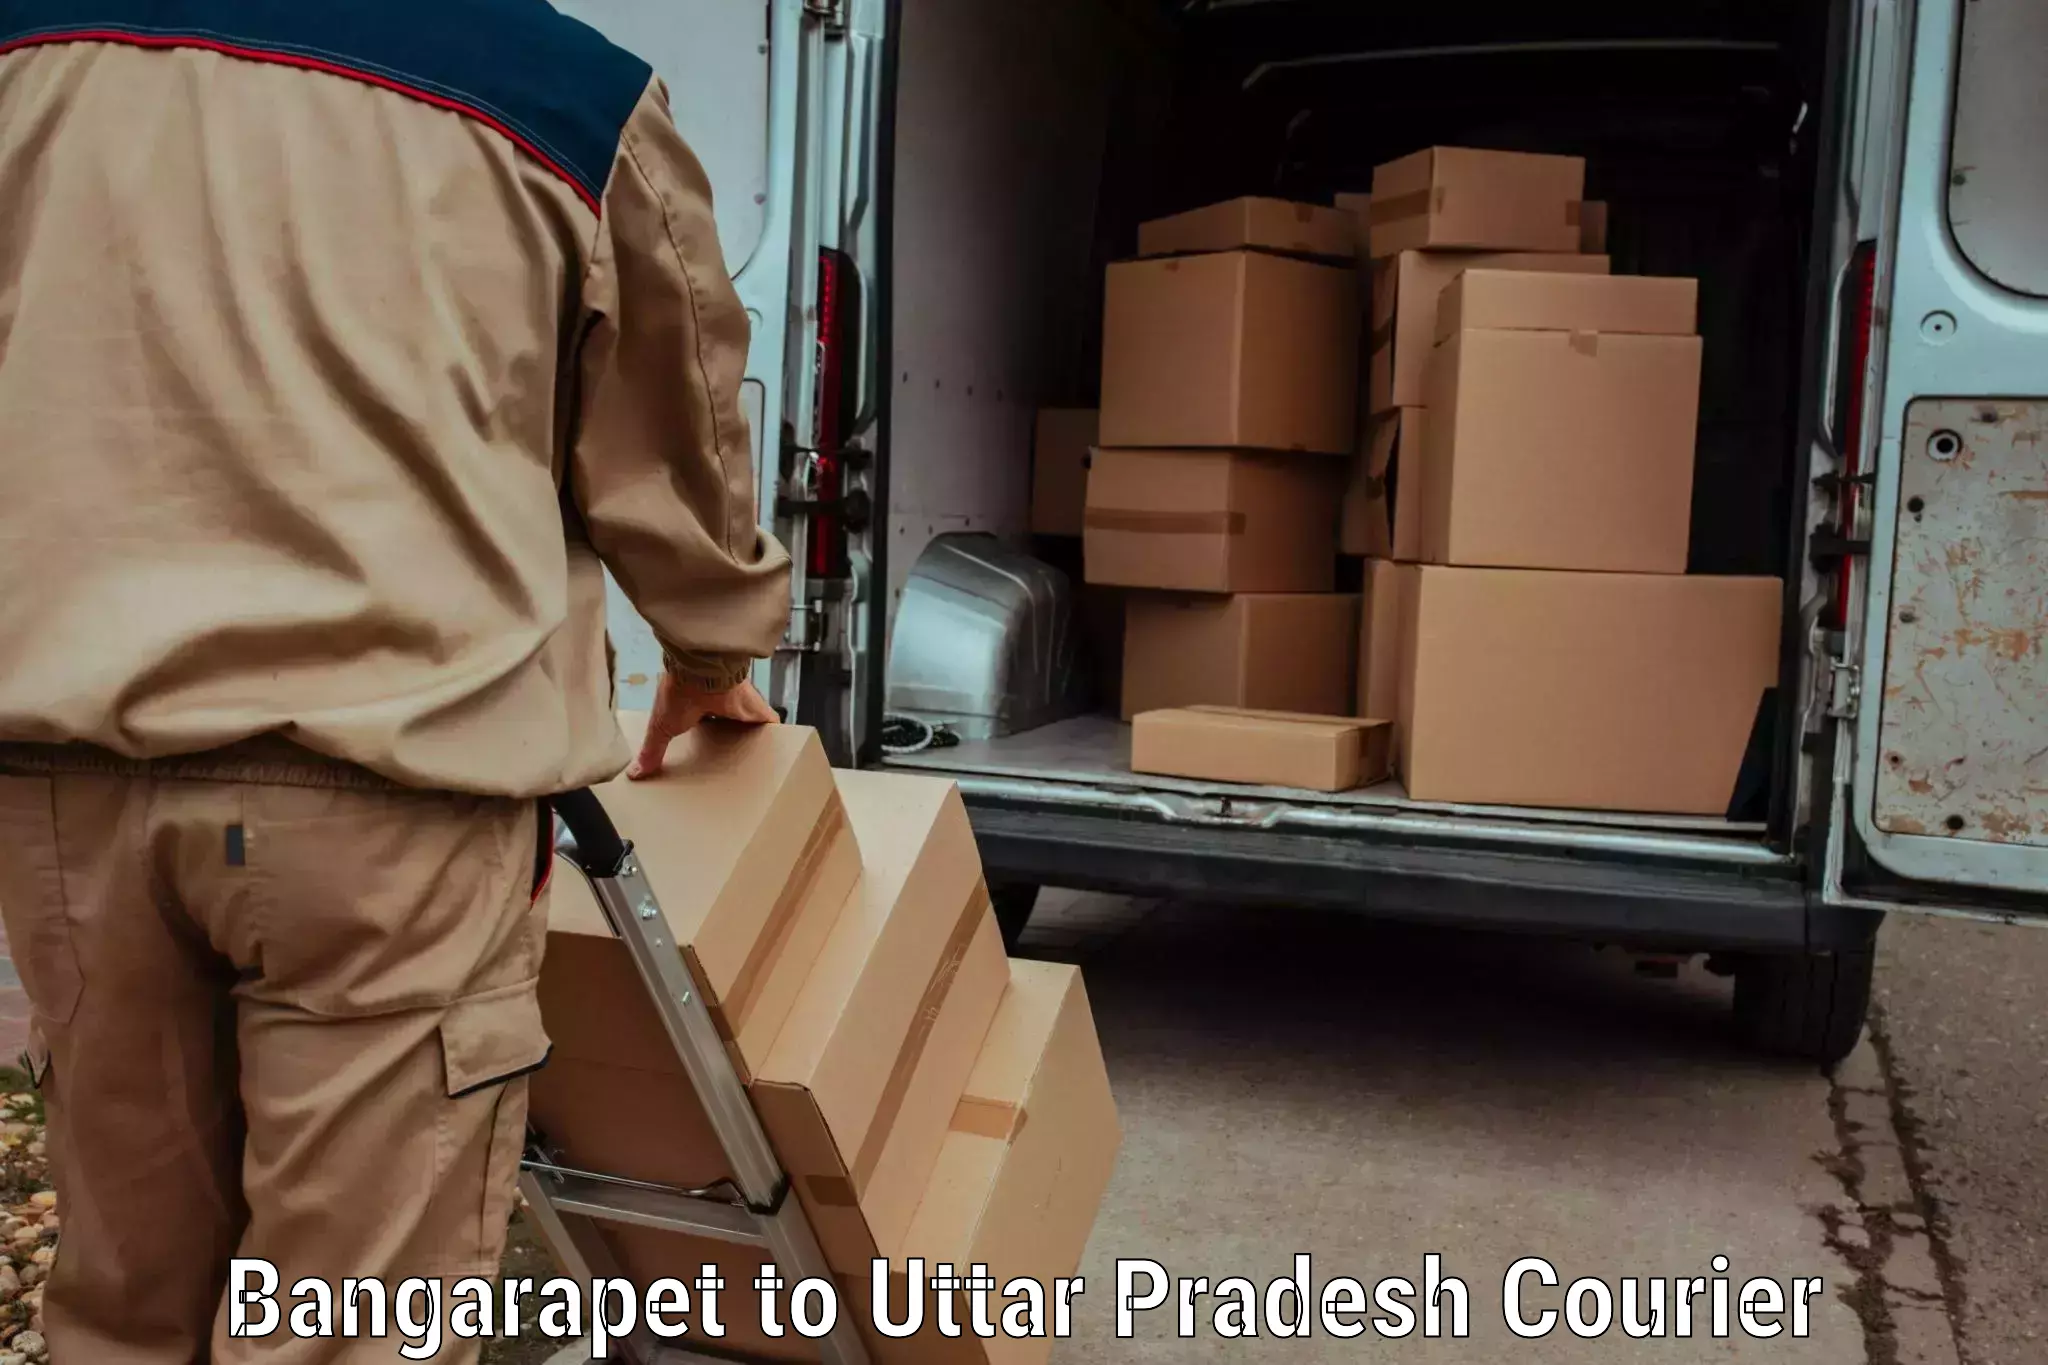 Tech-enabled shipping Bangarapet to IIIT Lucknow